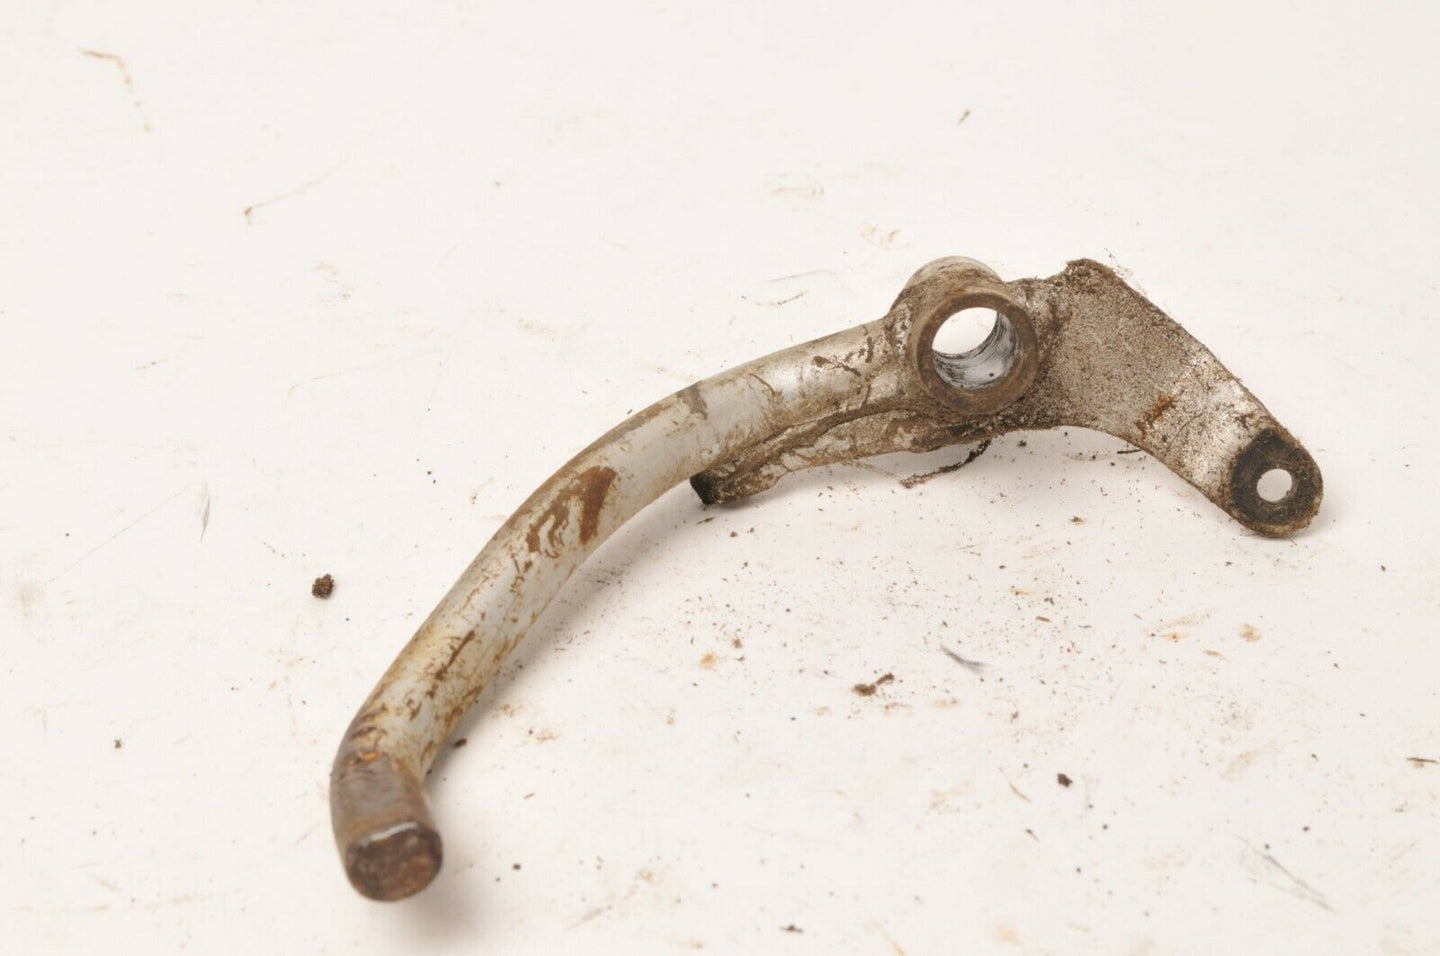 Yamaha 451-27211-01-35 Rear Brake Lever Pedal - TY80 1974 1975 74 75 Trials